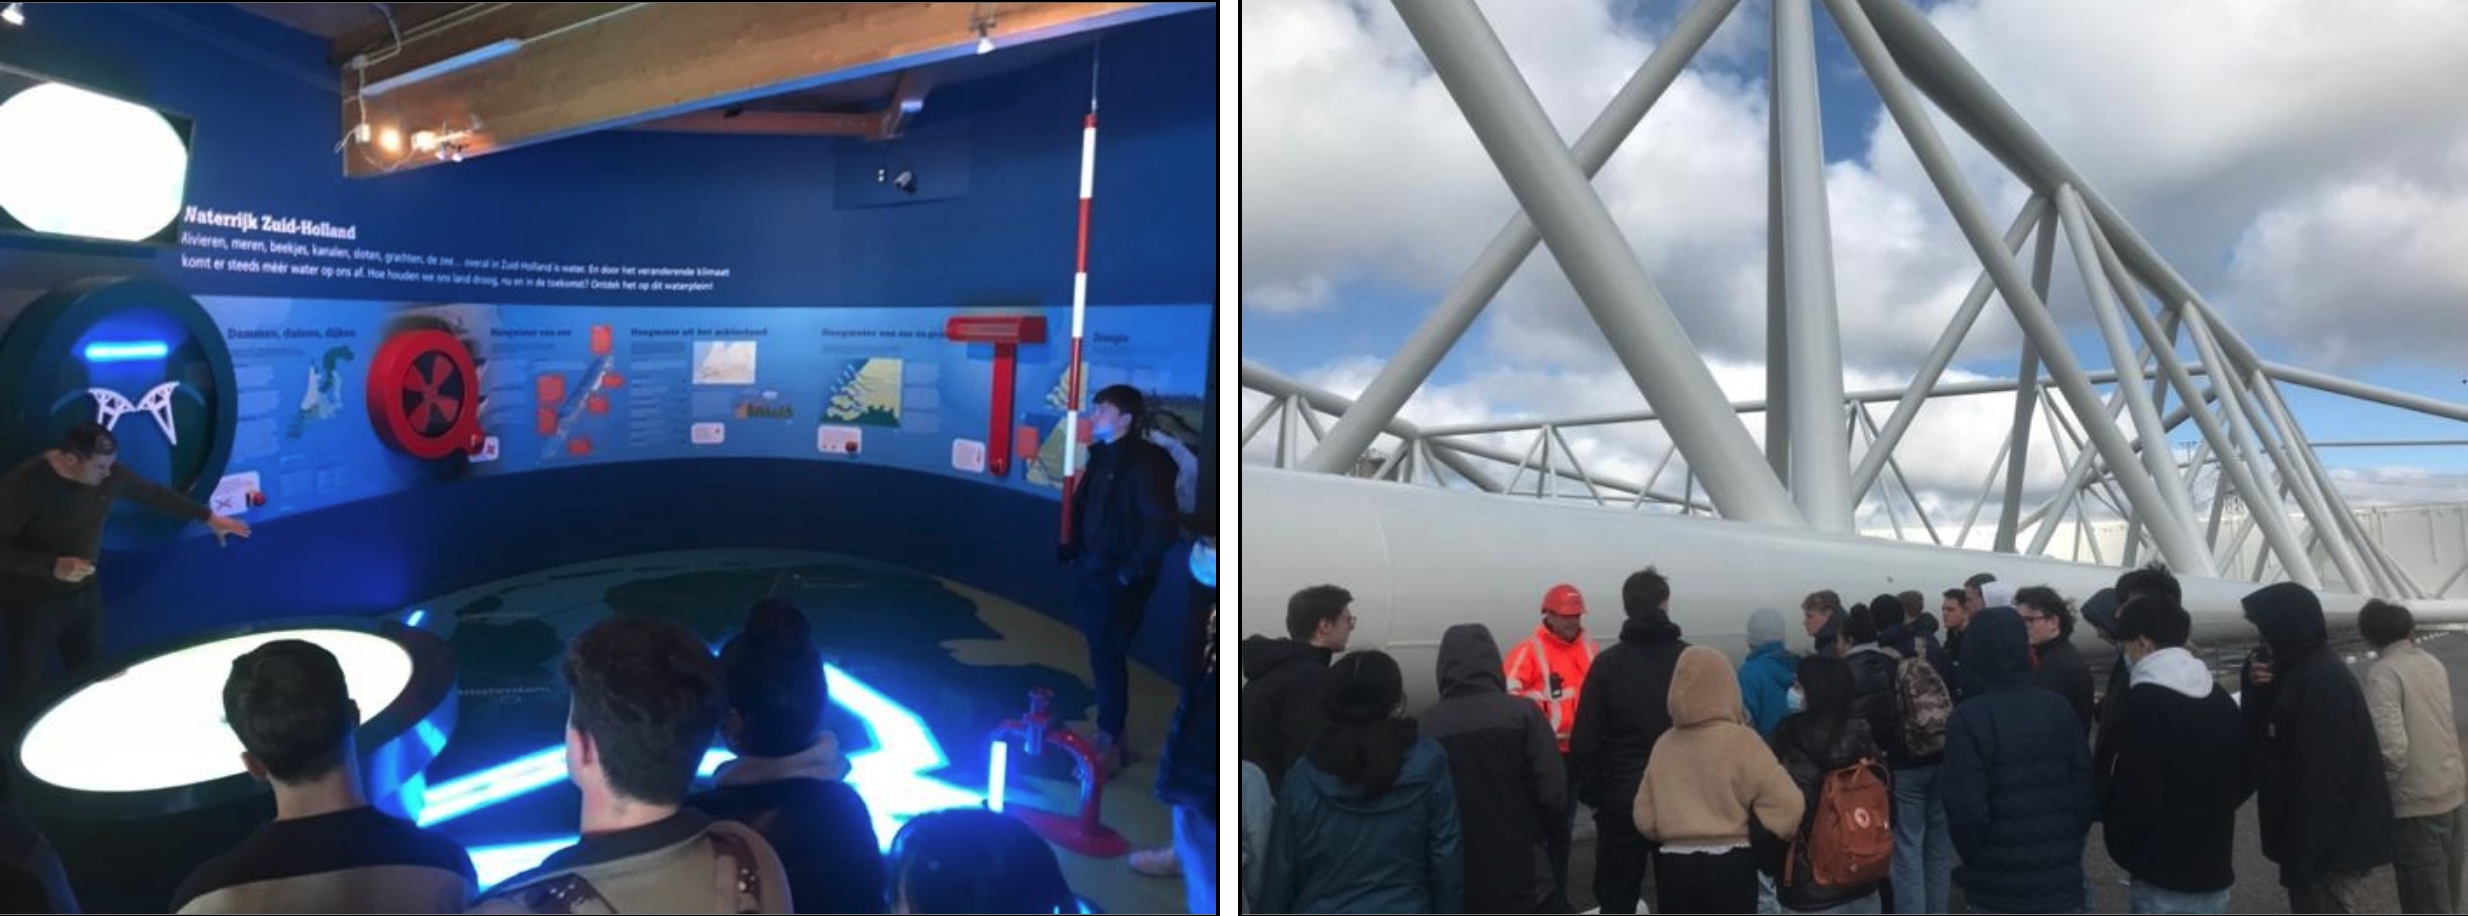 Students at the interactive Kerringhuis visitor centre (left); and touring the Maeslantkering storm surge barrier (right)